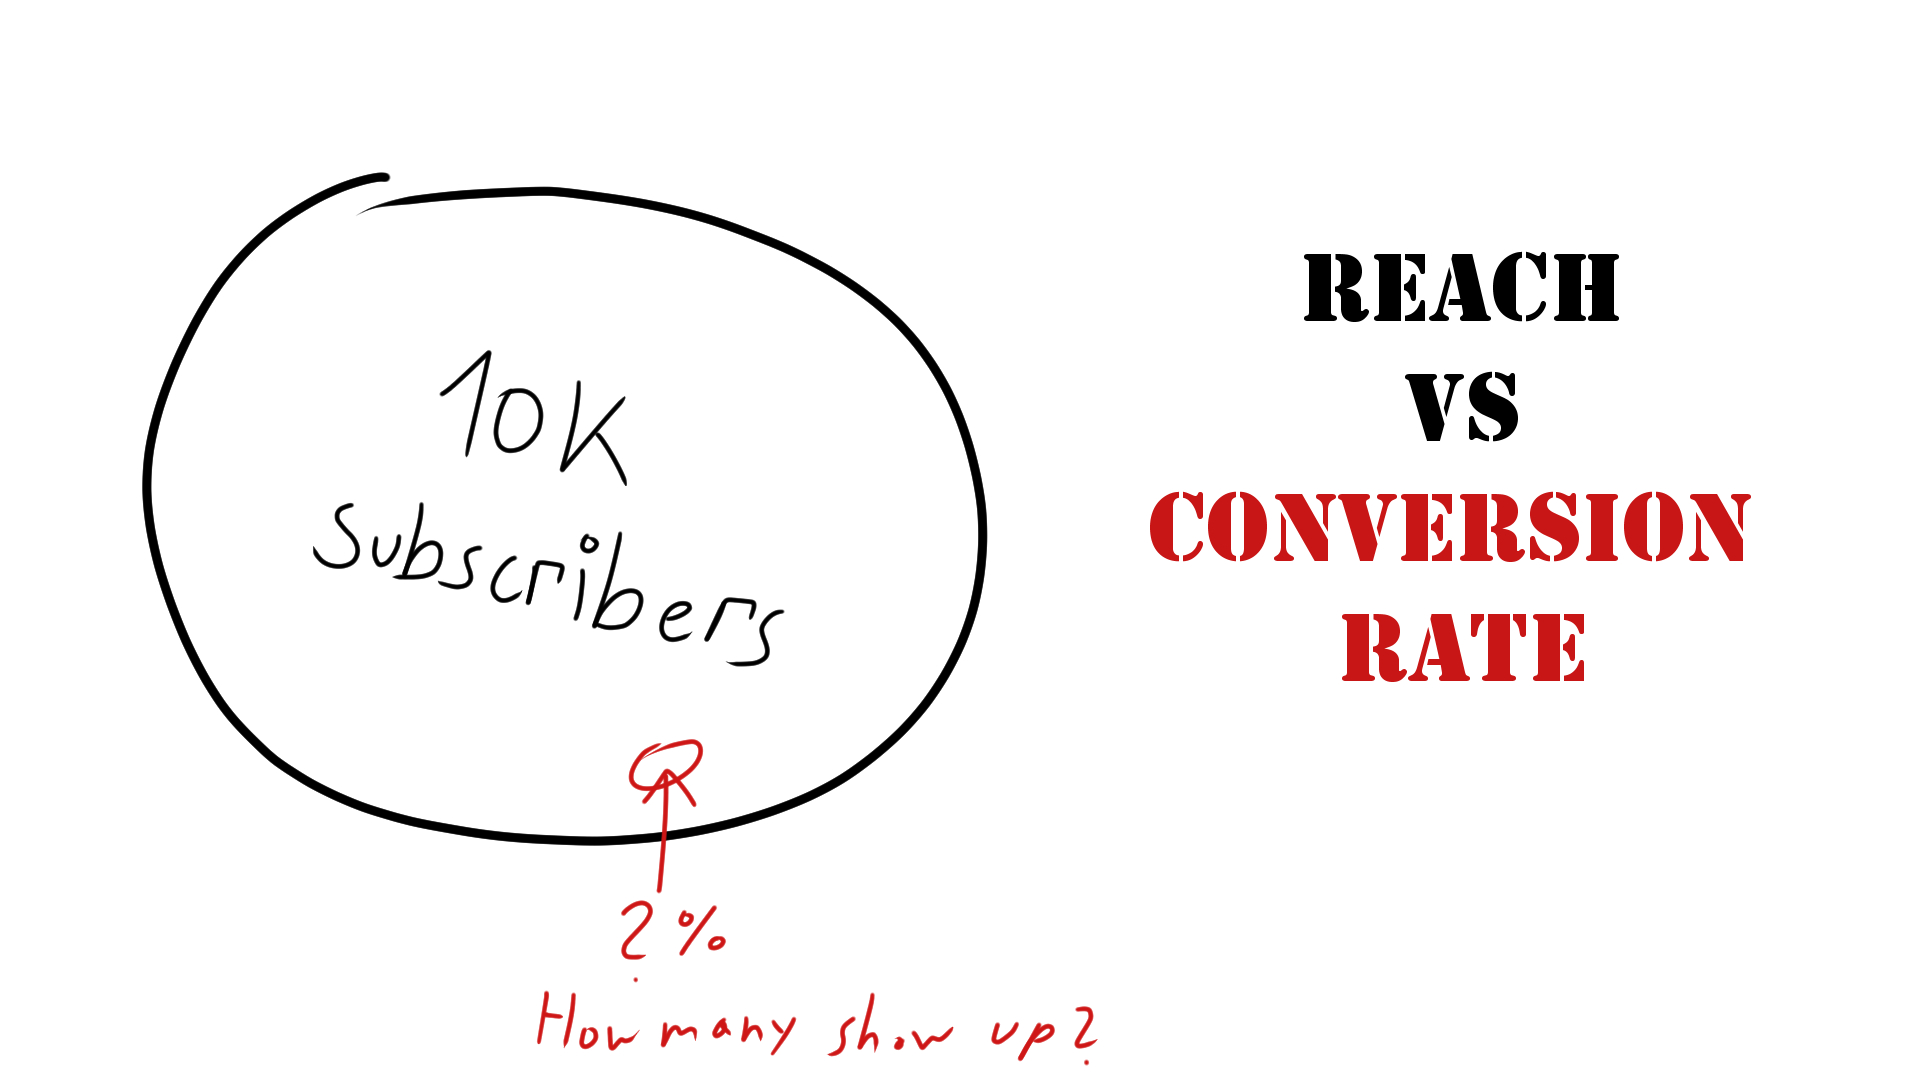 A subscriber bubble with an unknown size of people who actually convert